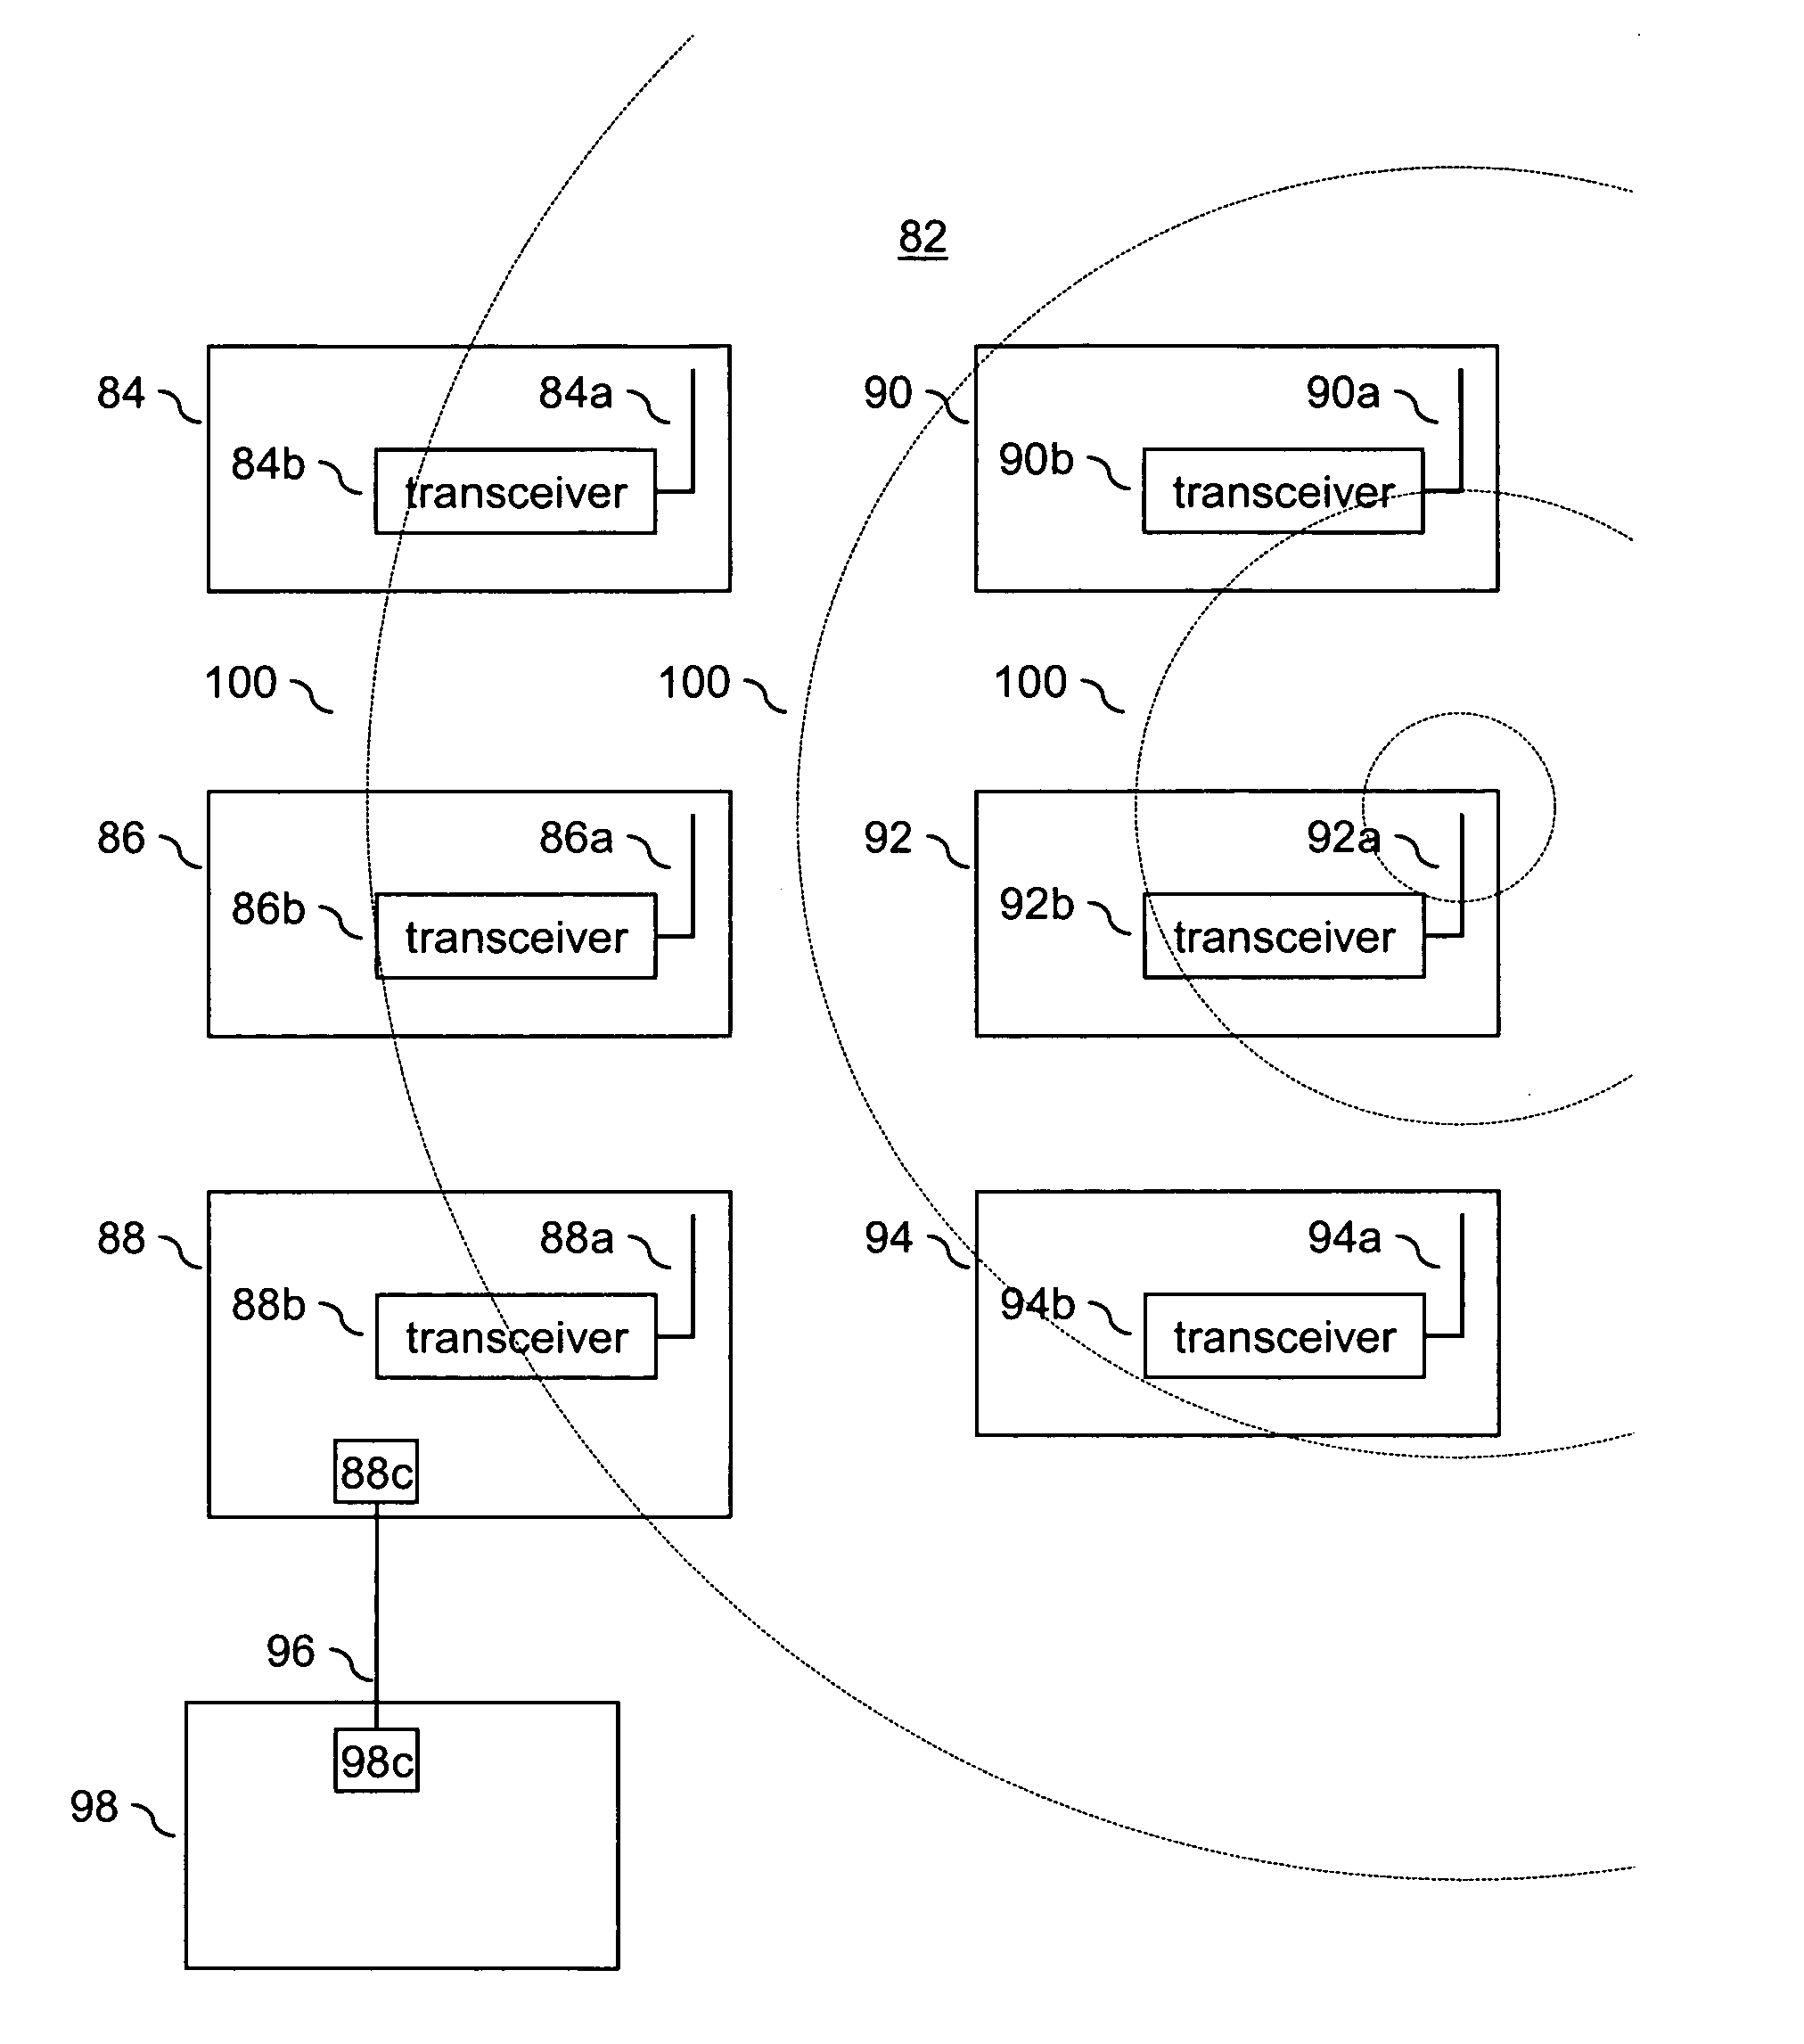 Protocol for improved utilization of a wireless network using interference estimation